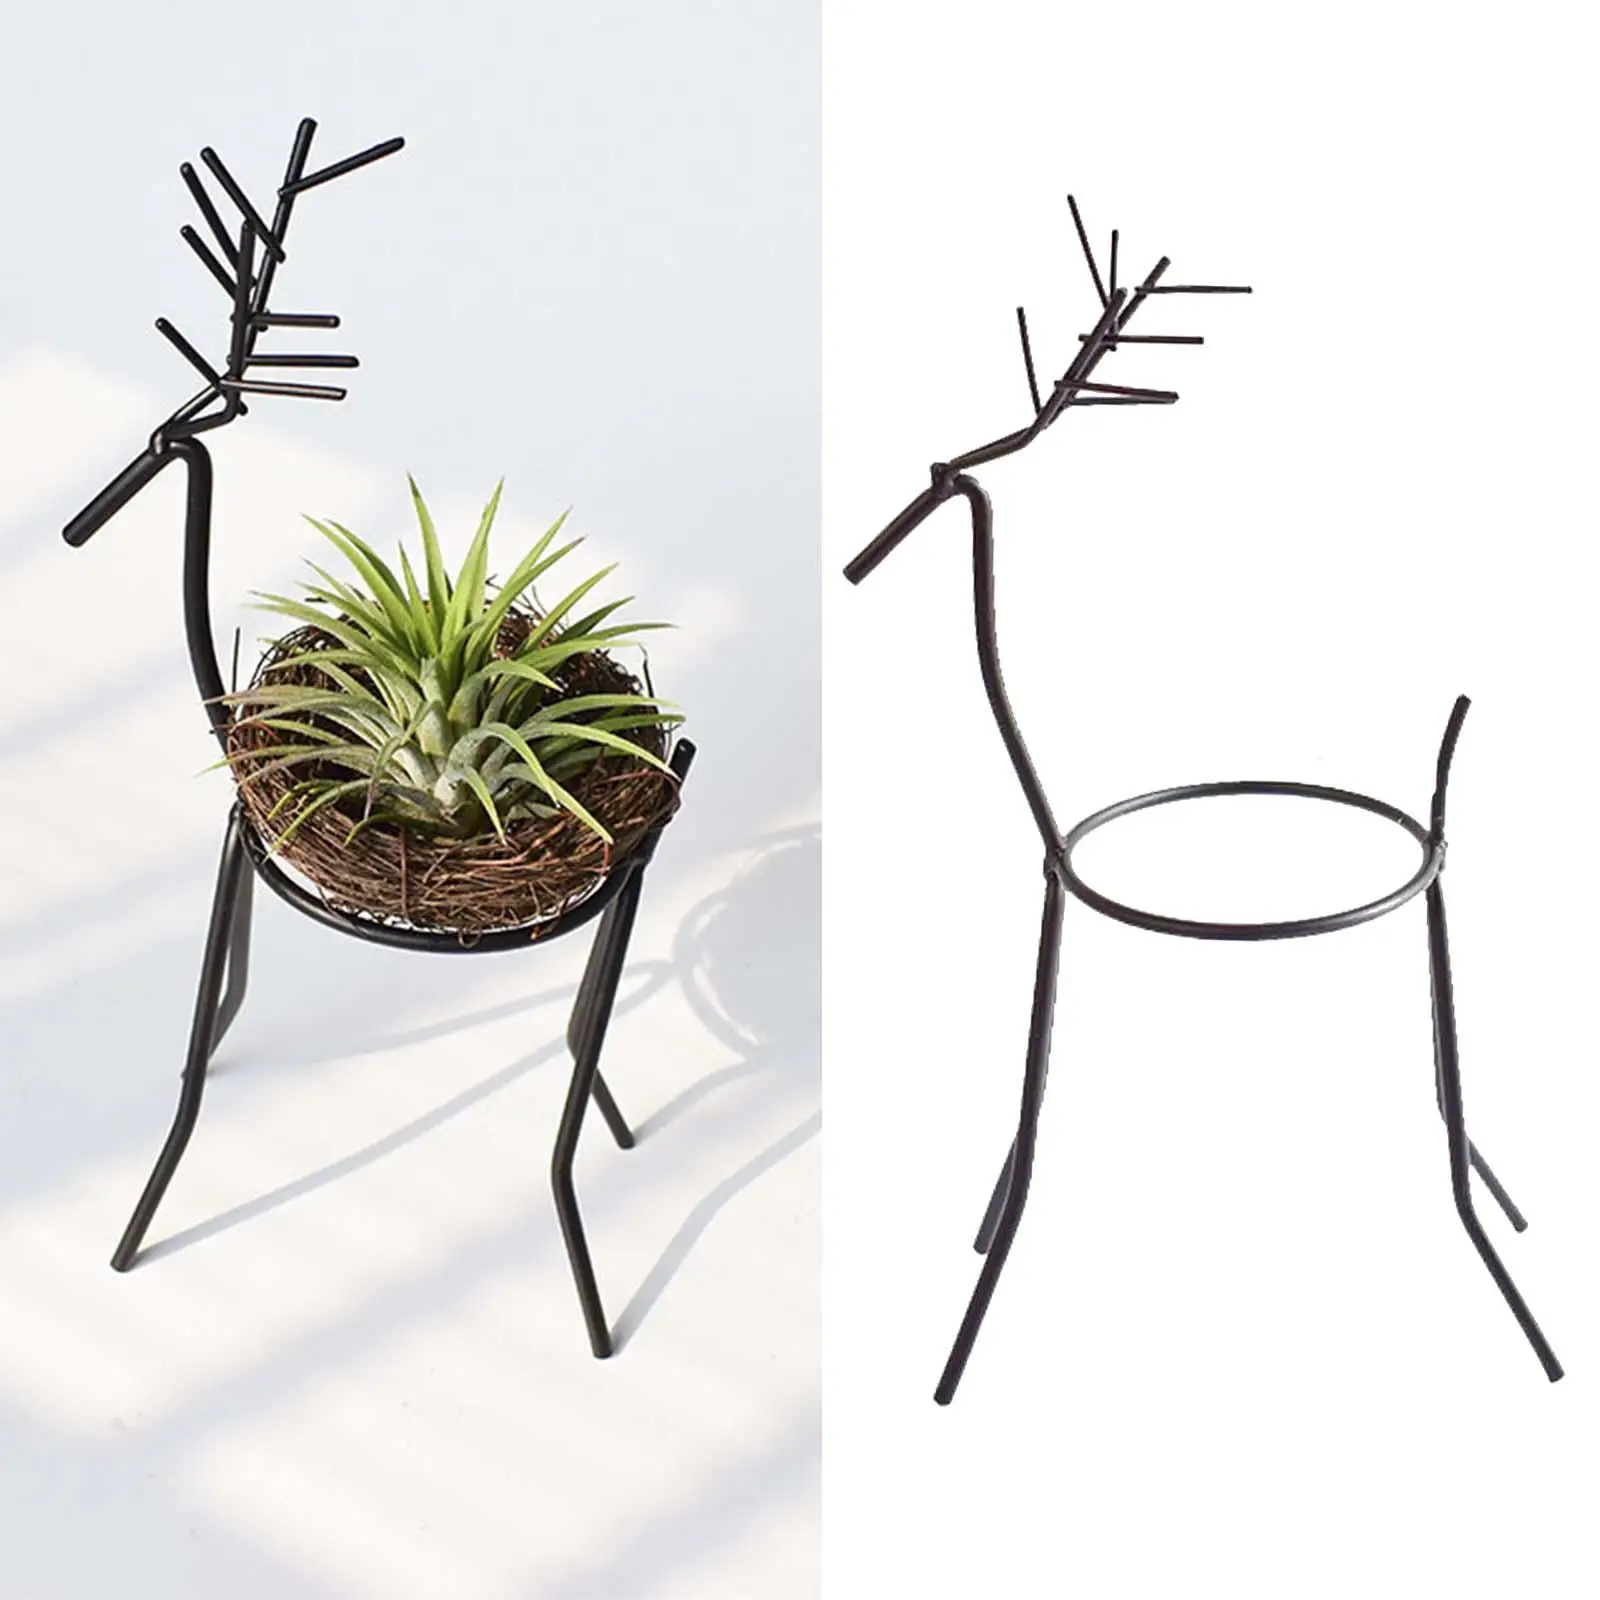 Metal Air Plant Holder Hanger Display Container Indoor Tillandsia Container for office Living Room Table Centerpiece Desktop